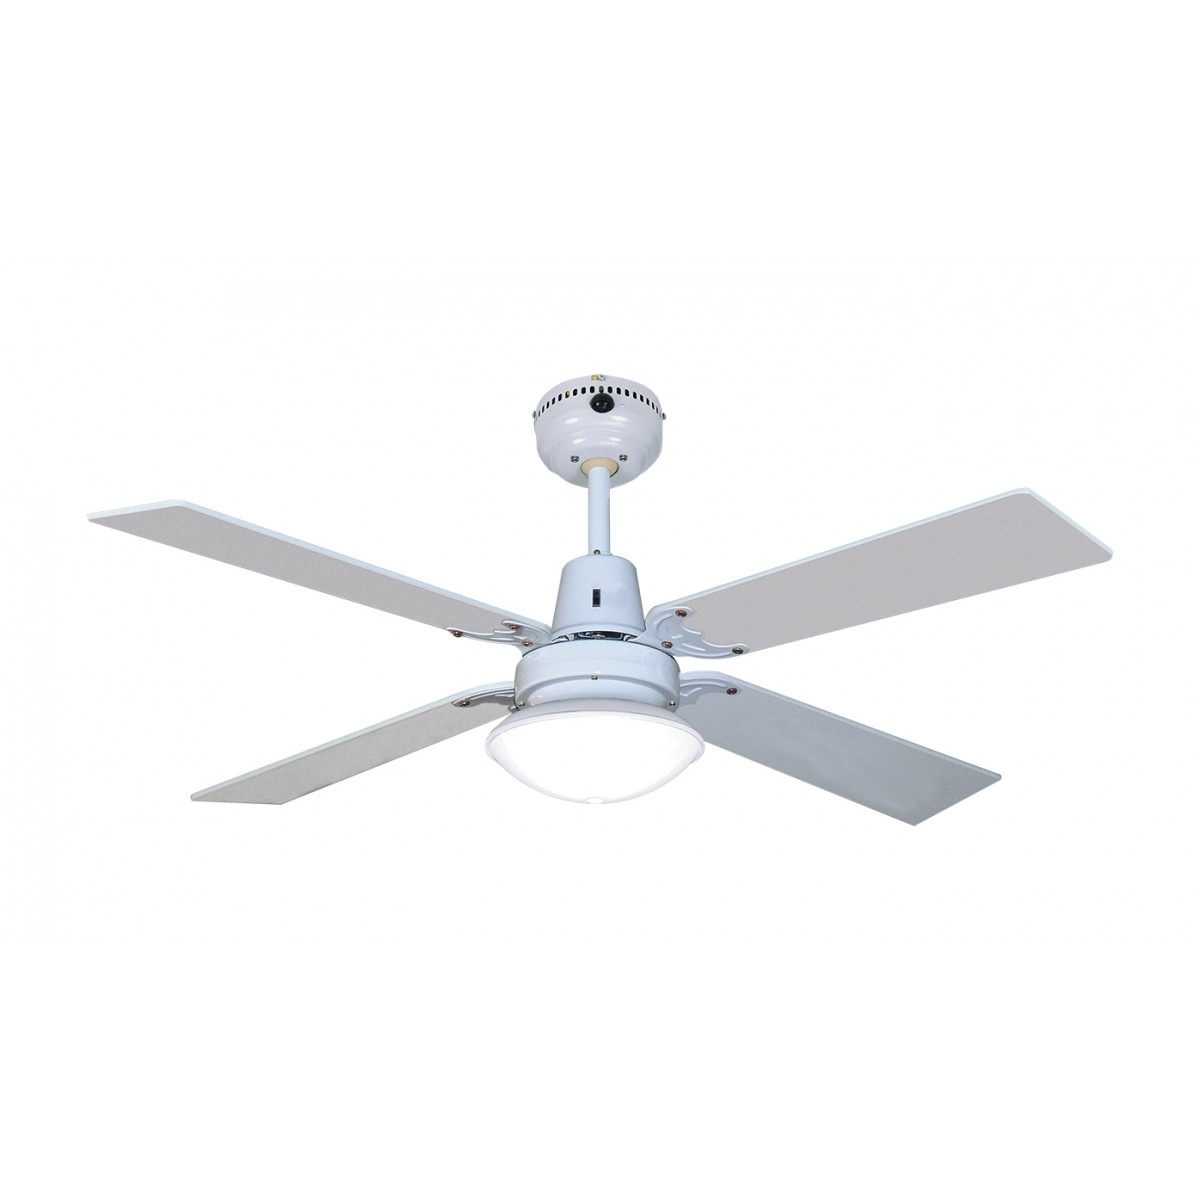 Heller 4 Blade Sienna Ceiling Fan With Light & Remote